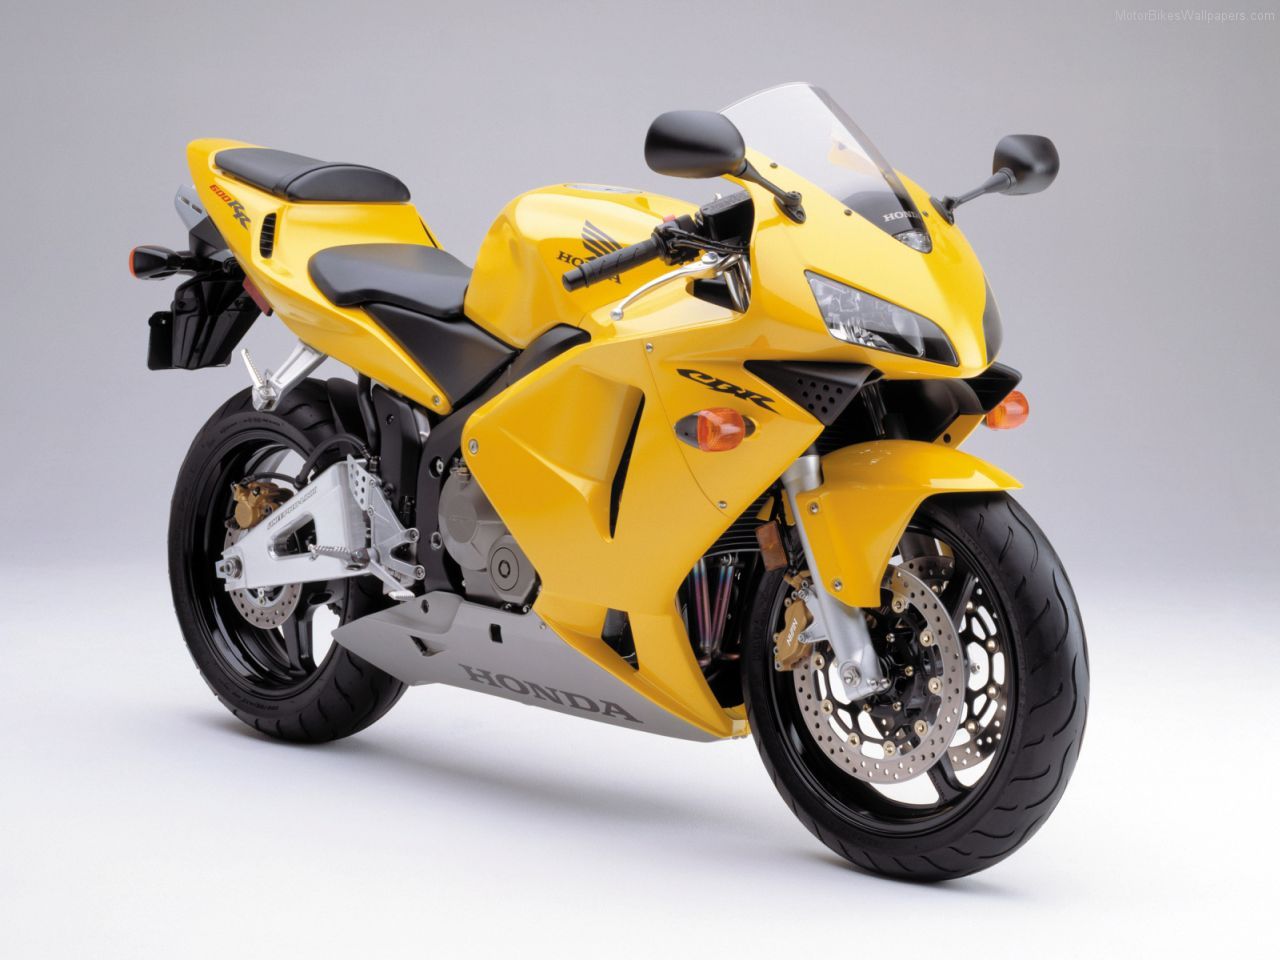 Free Download New Honda Bike Wallpapers Simplyherstyle 1280x960